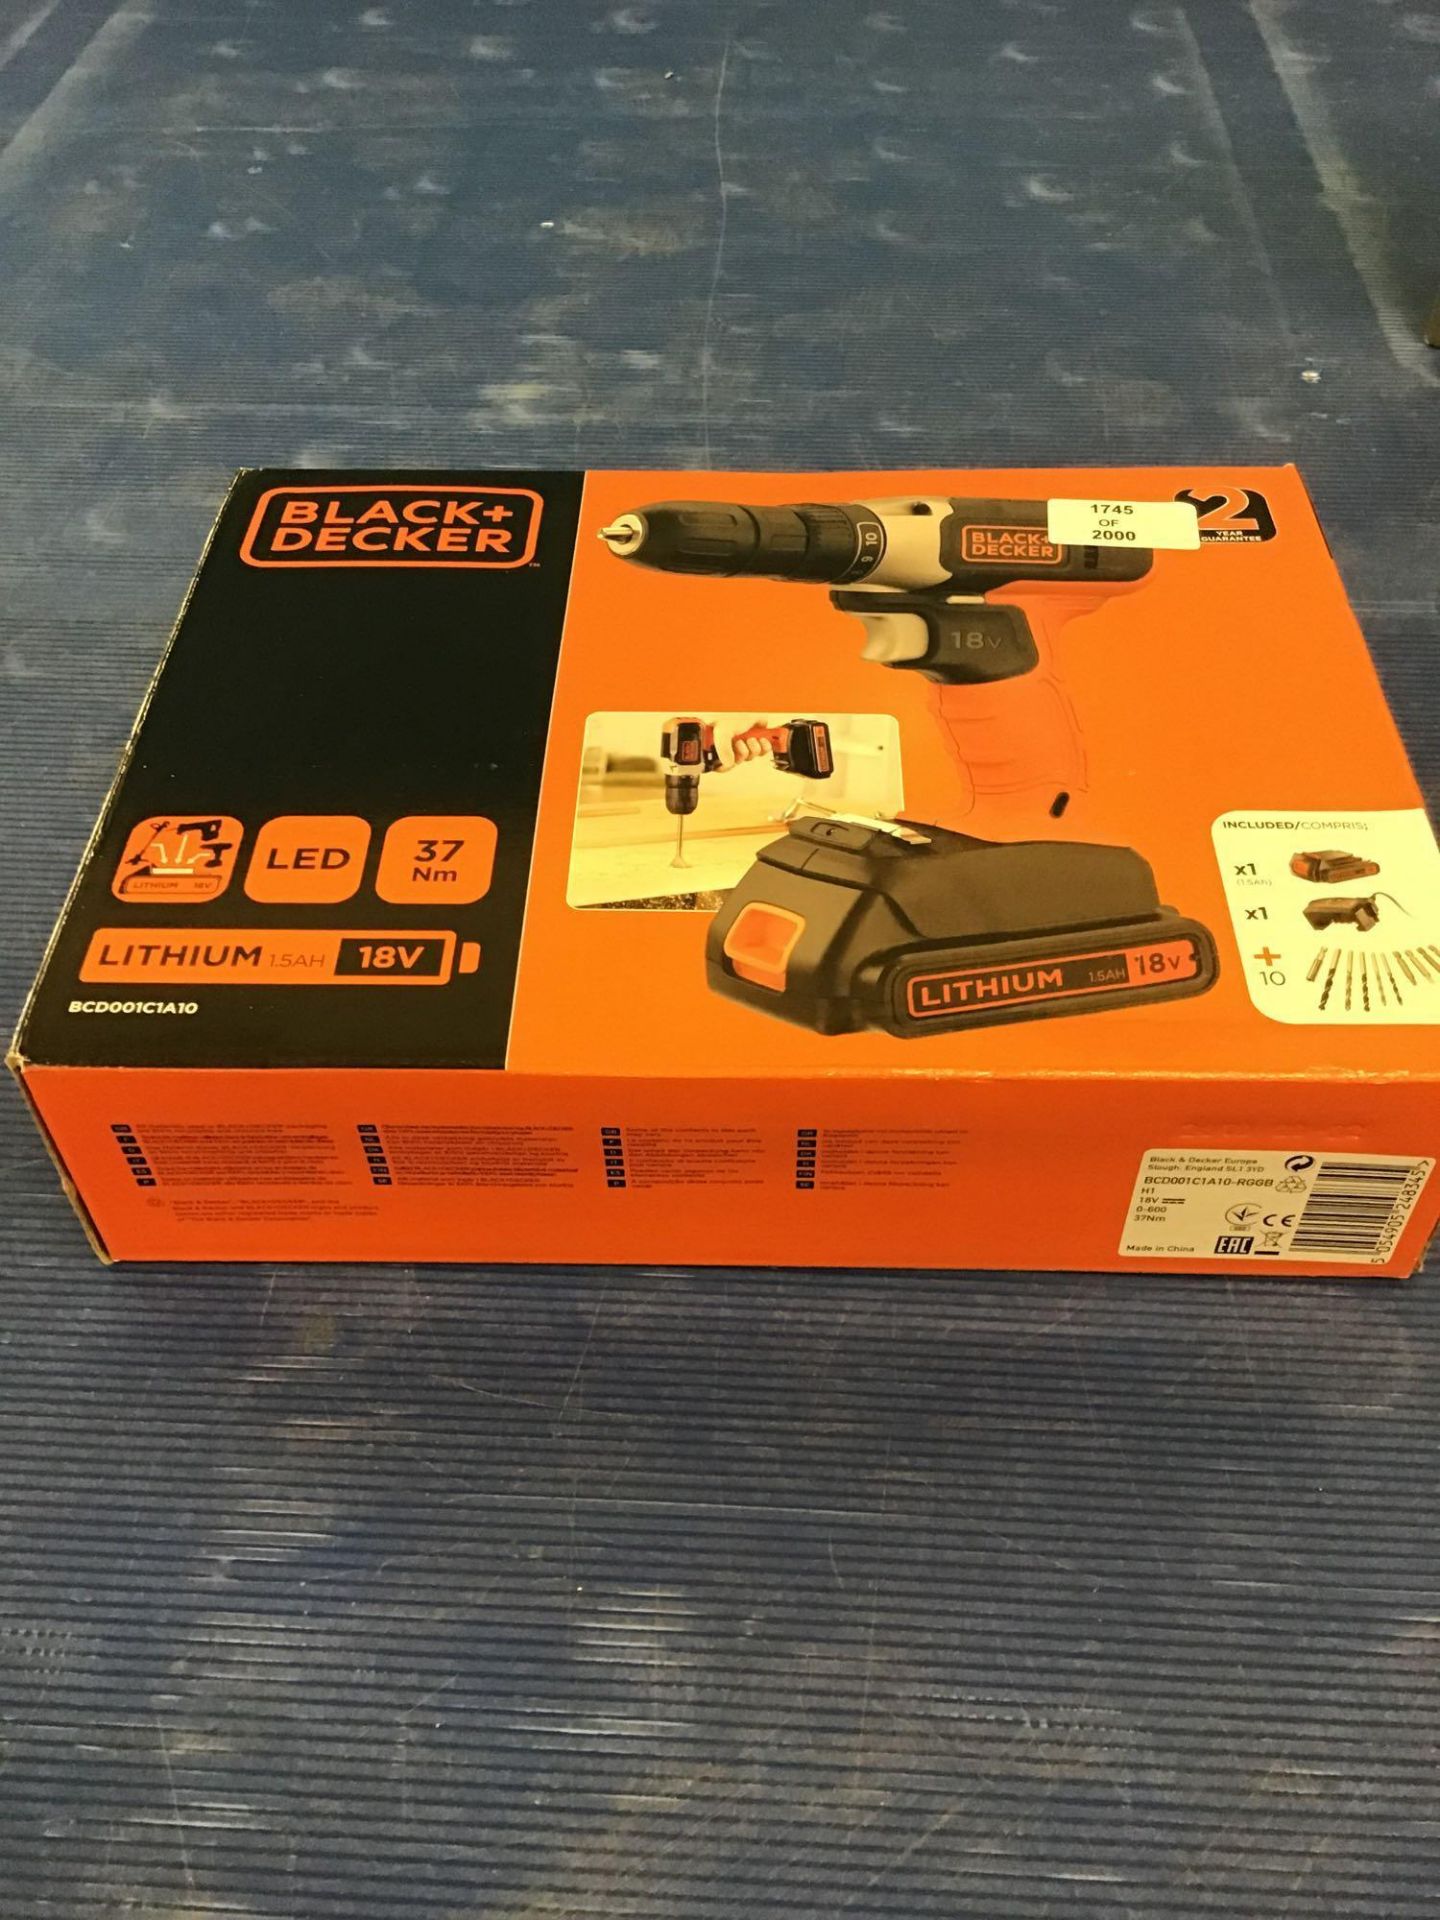 Black + Decker 18V Lithium-ion Drill Driver with Accessories, £50.00 RRP - Image 2 of 6